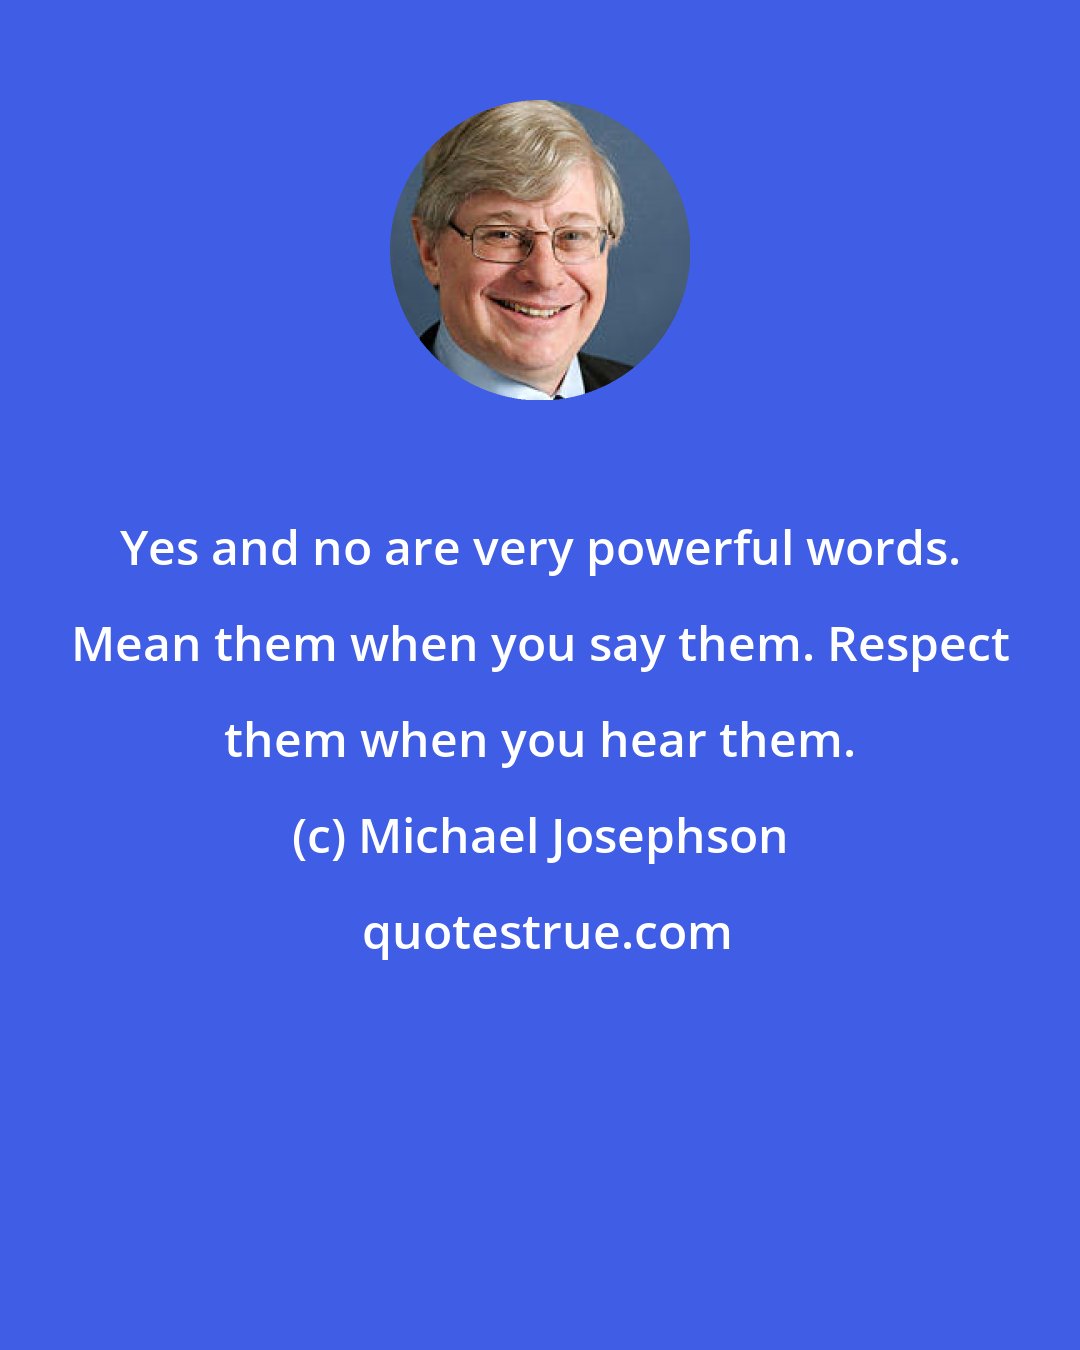 Michael Josephson: Yes and no are very powerful words. Mean them when you say them. Respect them when you hear them.